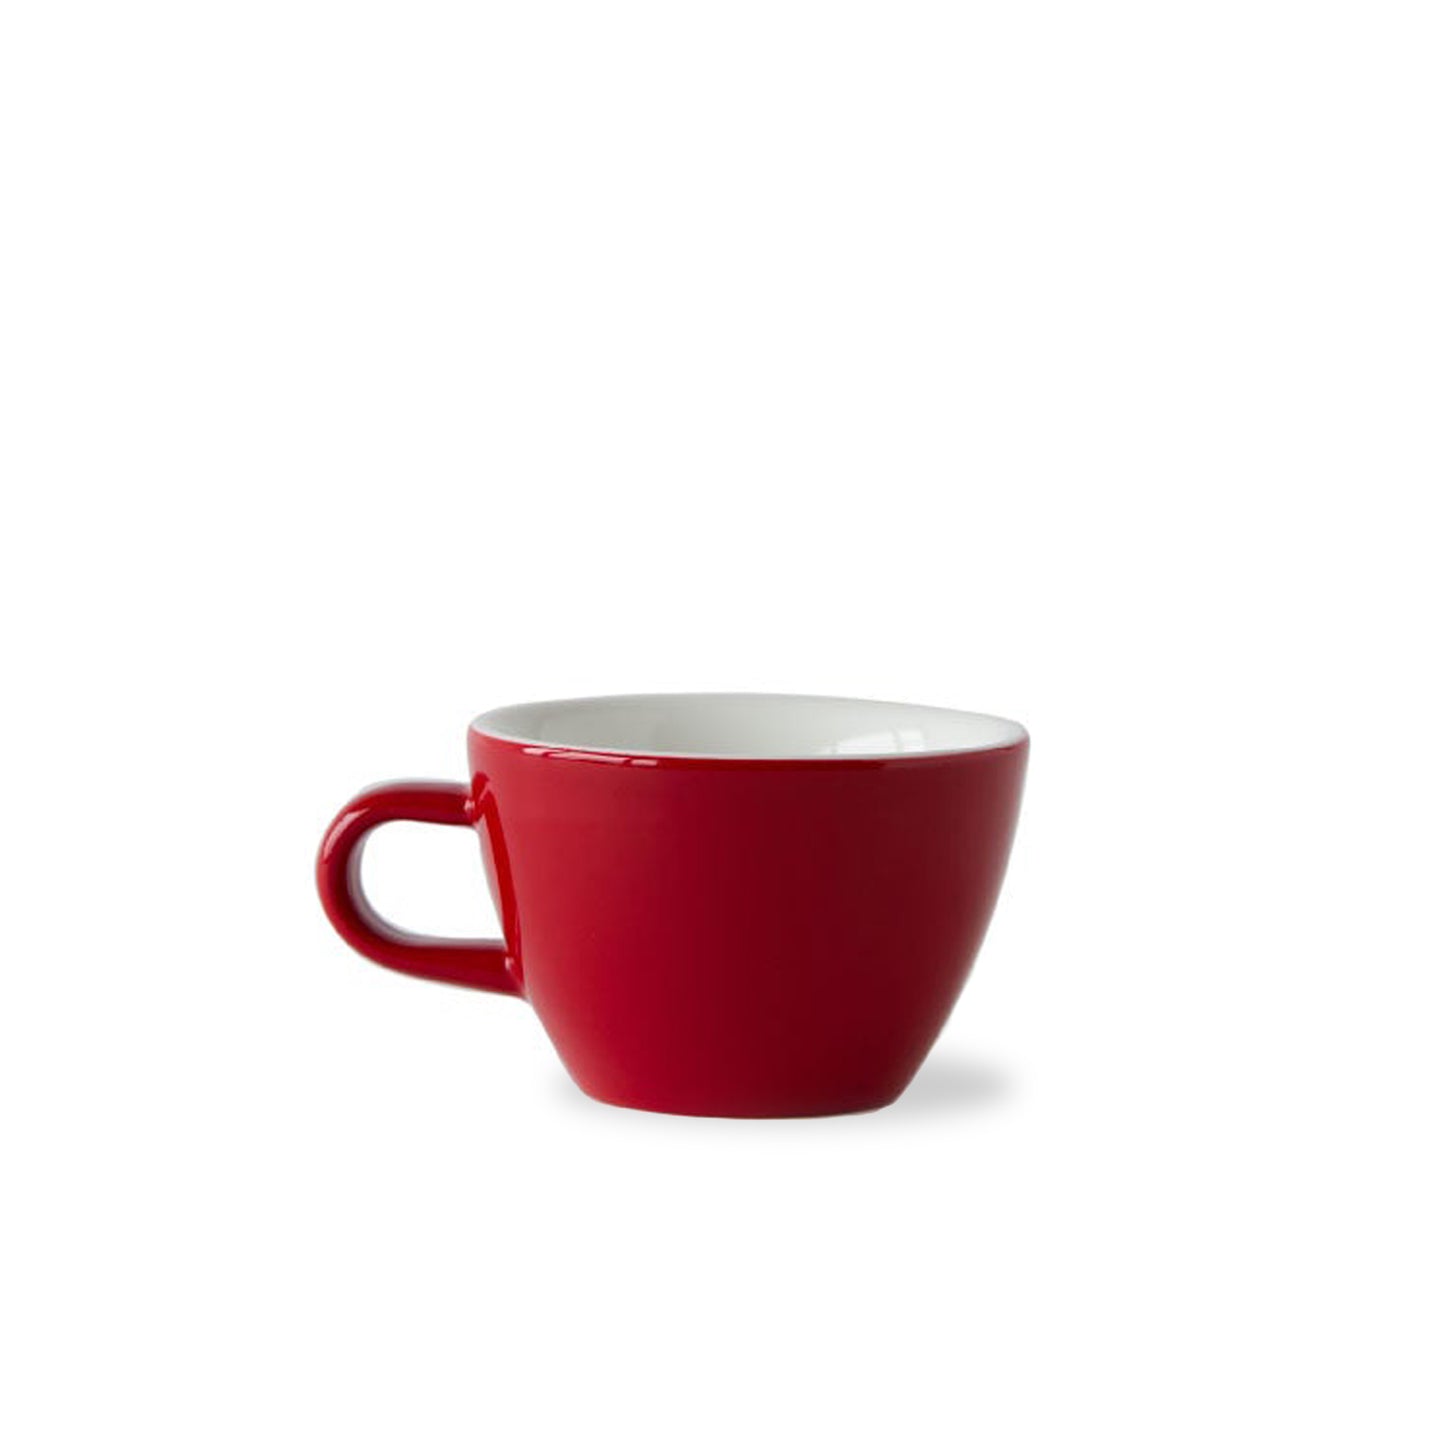 ACME Evo Flat White Cup + Saucer 150ml (Pack of 6)